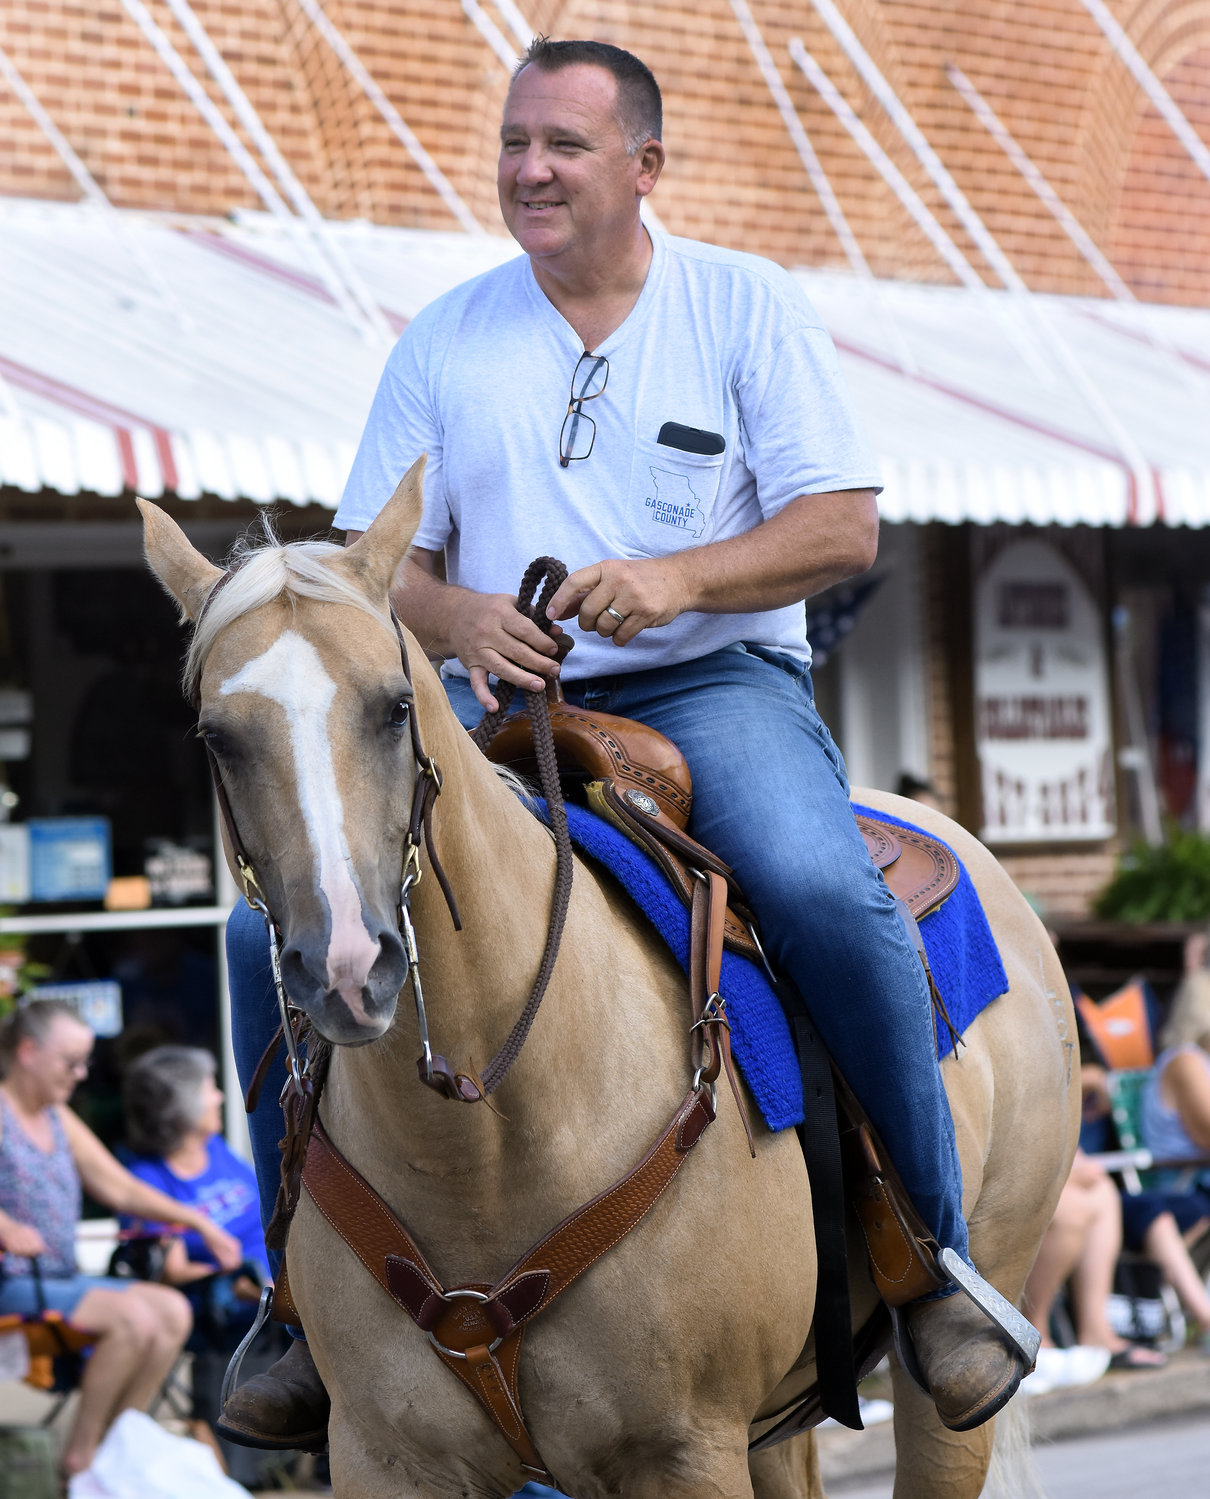 Timothy Schulte paraded on horseback during the Gasconade County Fair’s July 28 event through downtown Owensville. Schulte topped two other challengers for the Republican party nomination in the Aug. 2 Primary. He has no opponent in November.